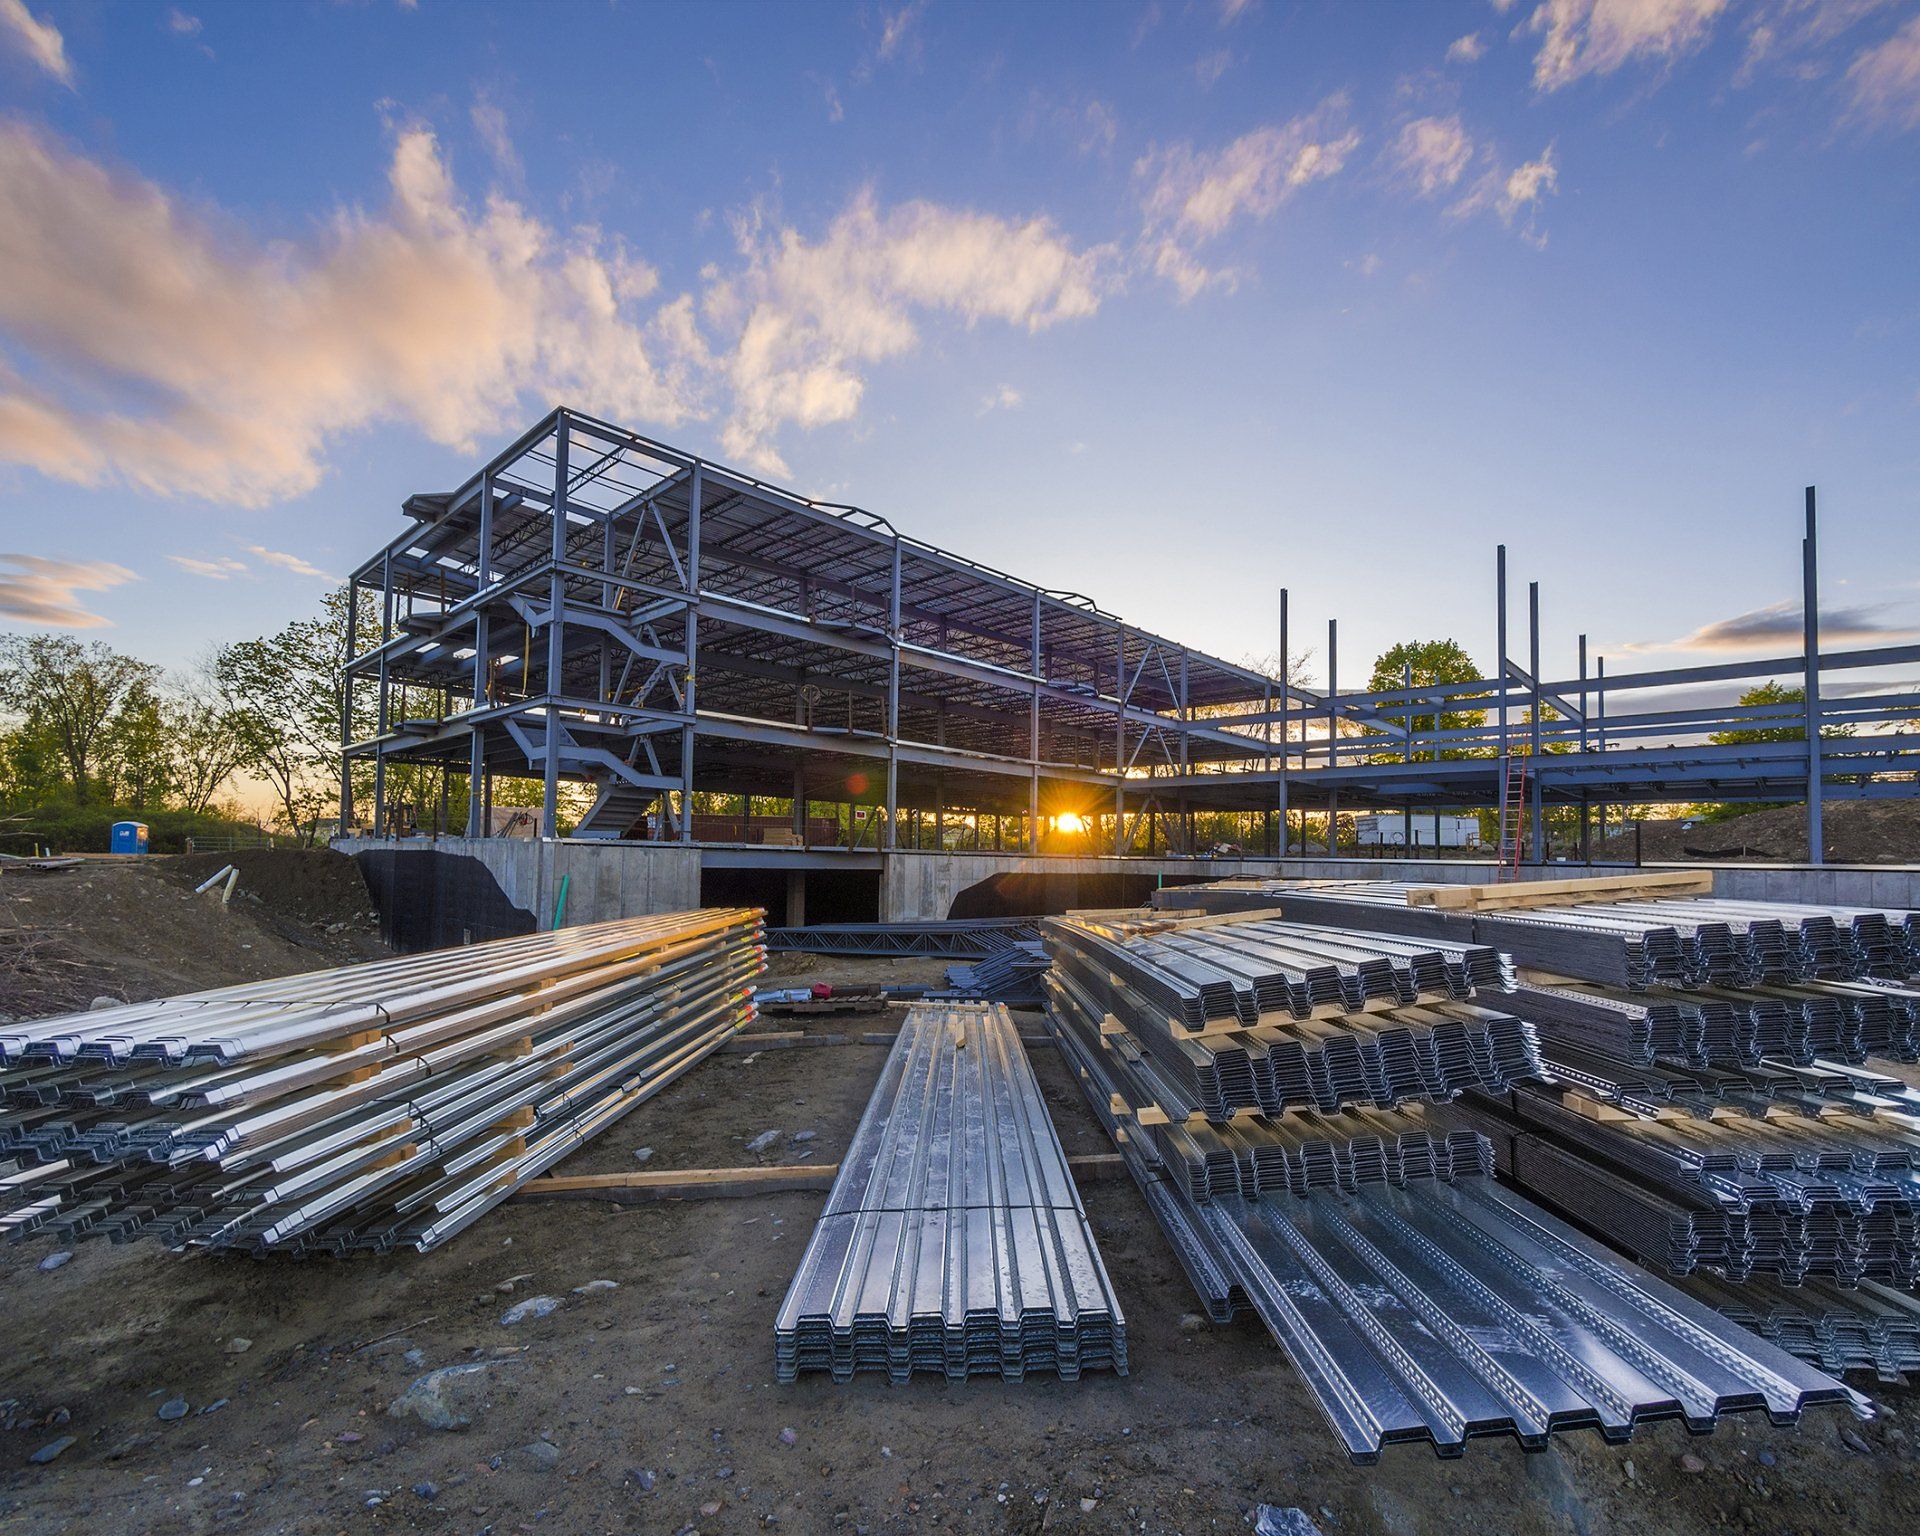 Construction Site with Steel Flooring - Billings, MT - Western States Steel Erection Co.